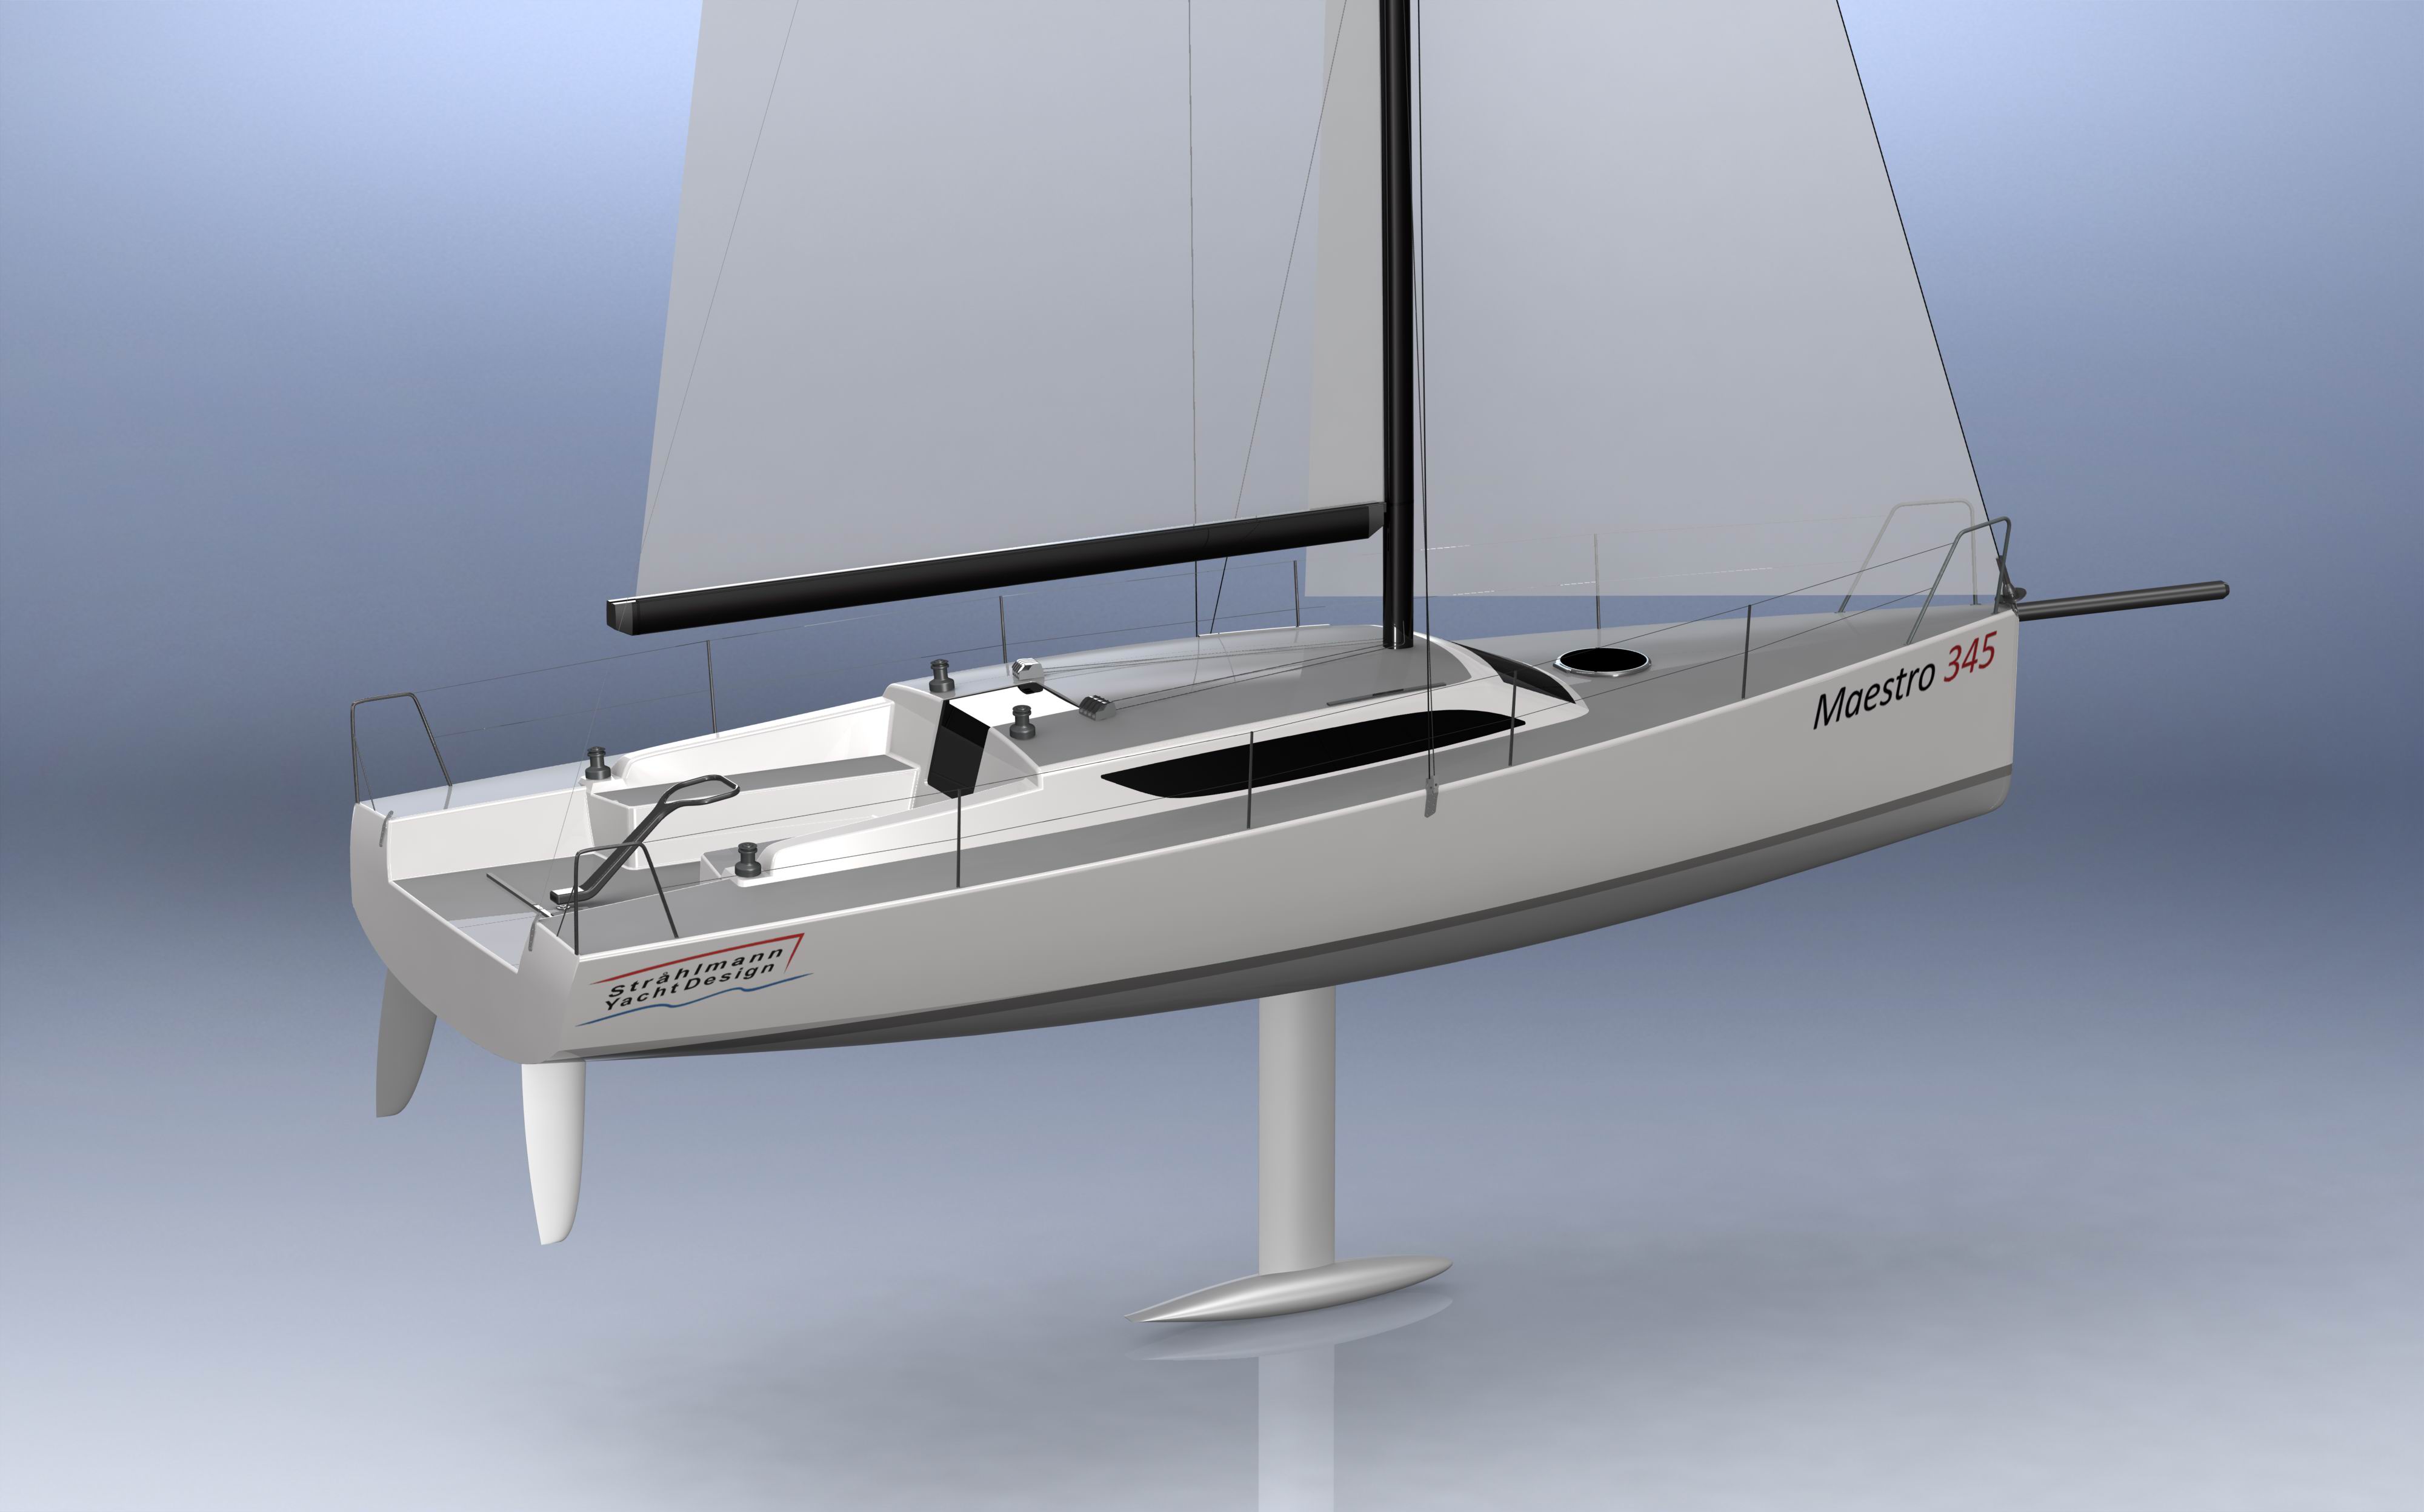 The new exiting and fast sailboat"